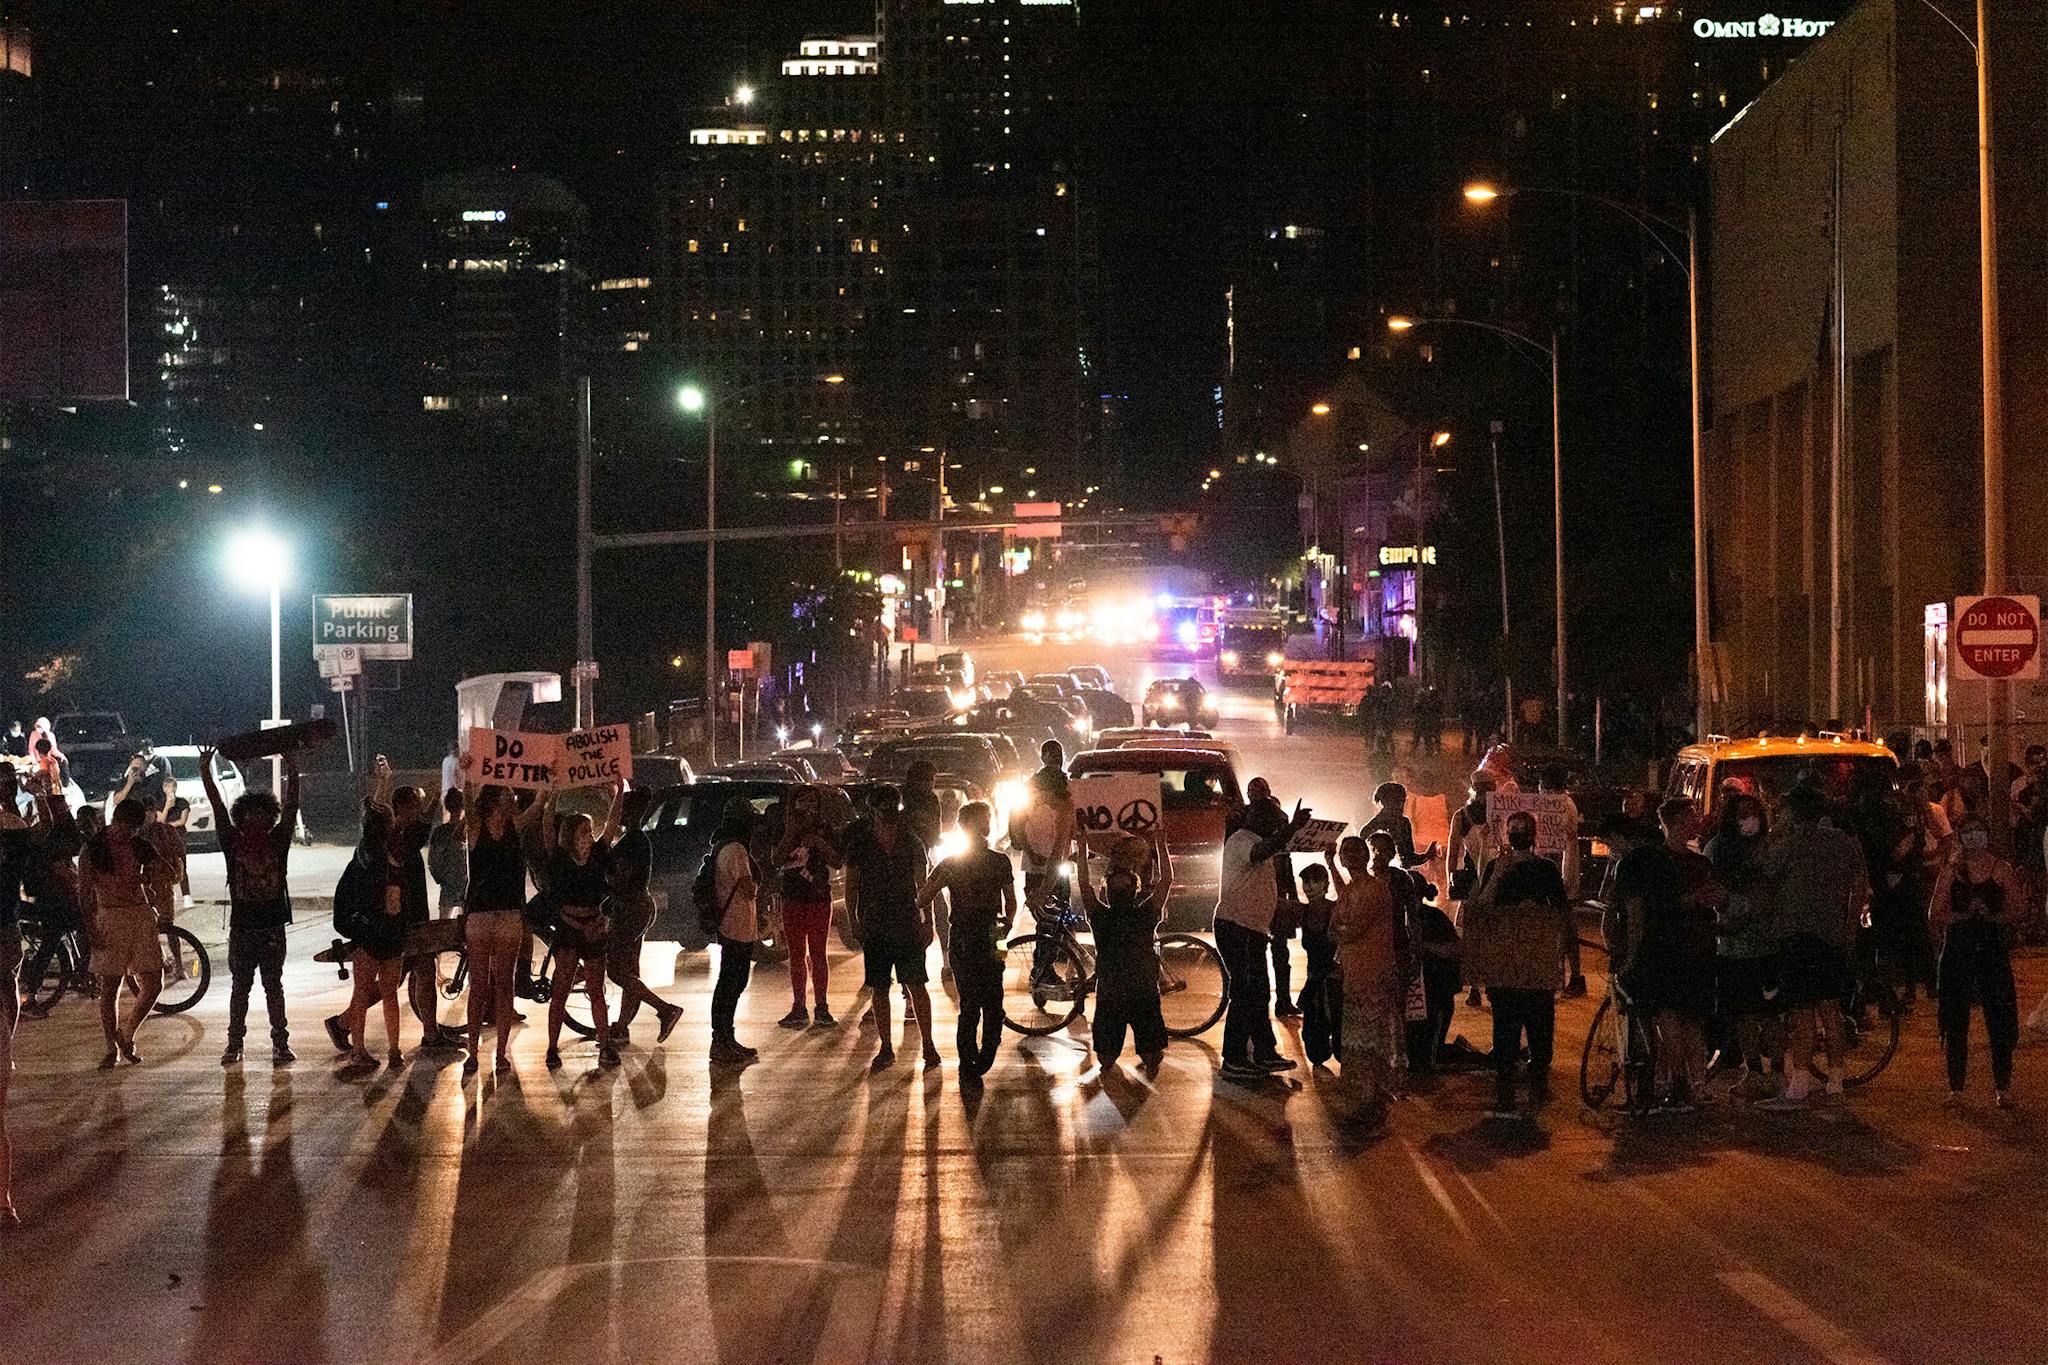 Protesters kneel while blocking the intersection of 7th Street and I-35 in front of police headquarters in Austin on May 30, 2020.